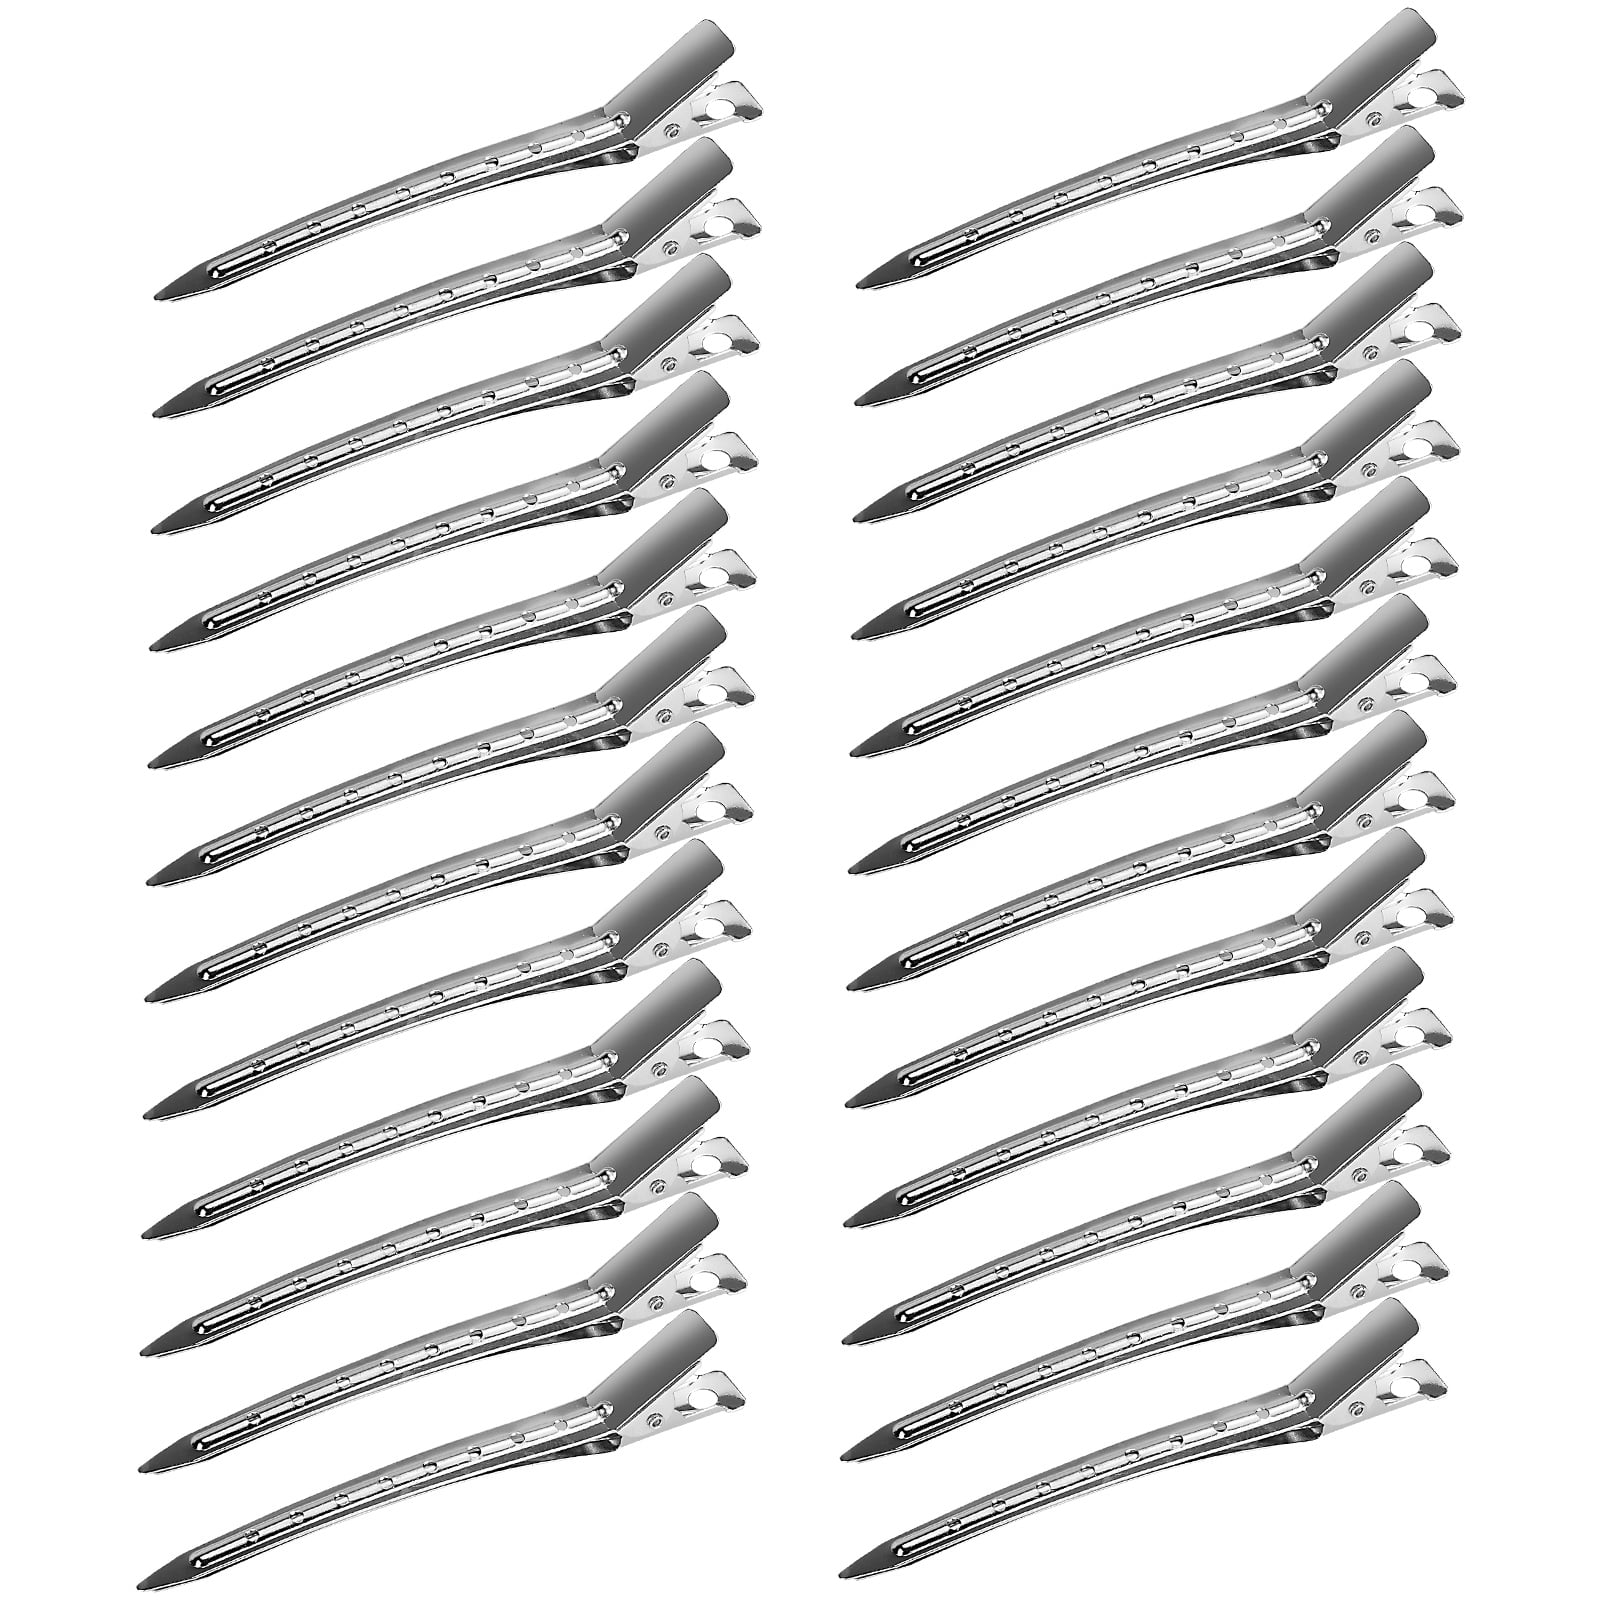 Hijeaton 24pcs Metal Duck Billed Hair Clips for Women Styling Sectioning, Silver Hair Pins for Long Hair, Alligator Curl LOC Clips for Thick Hair